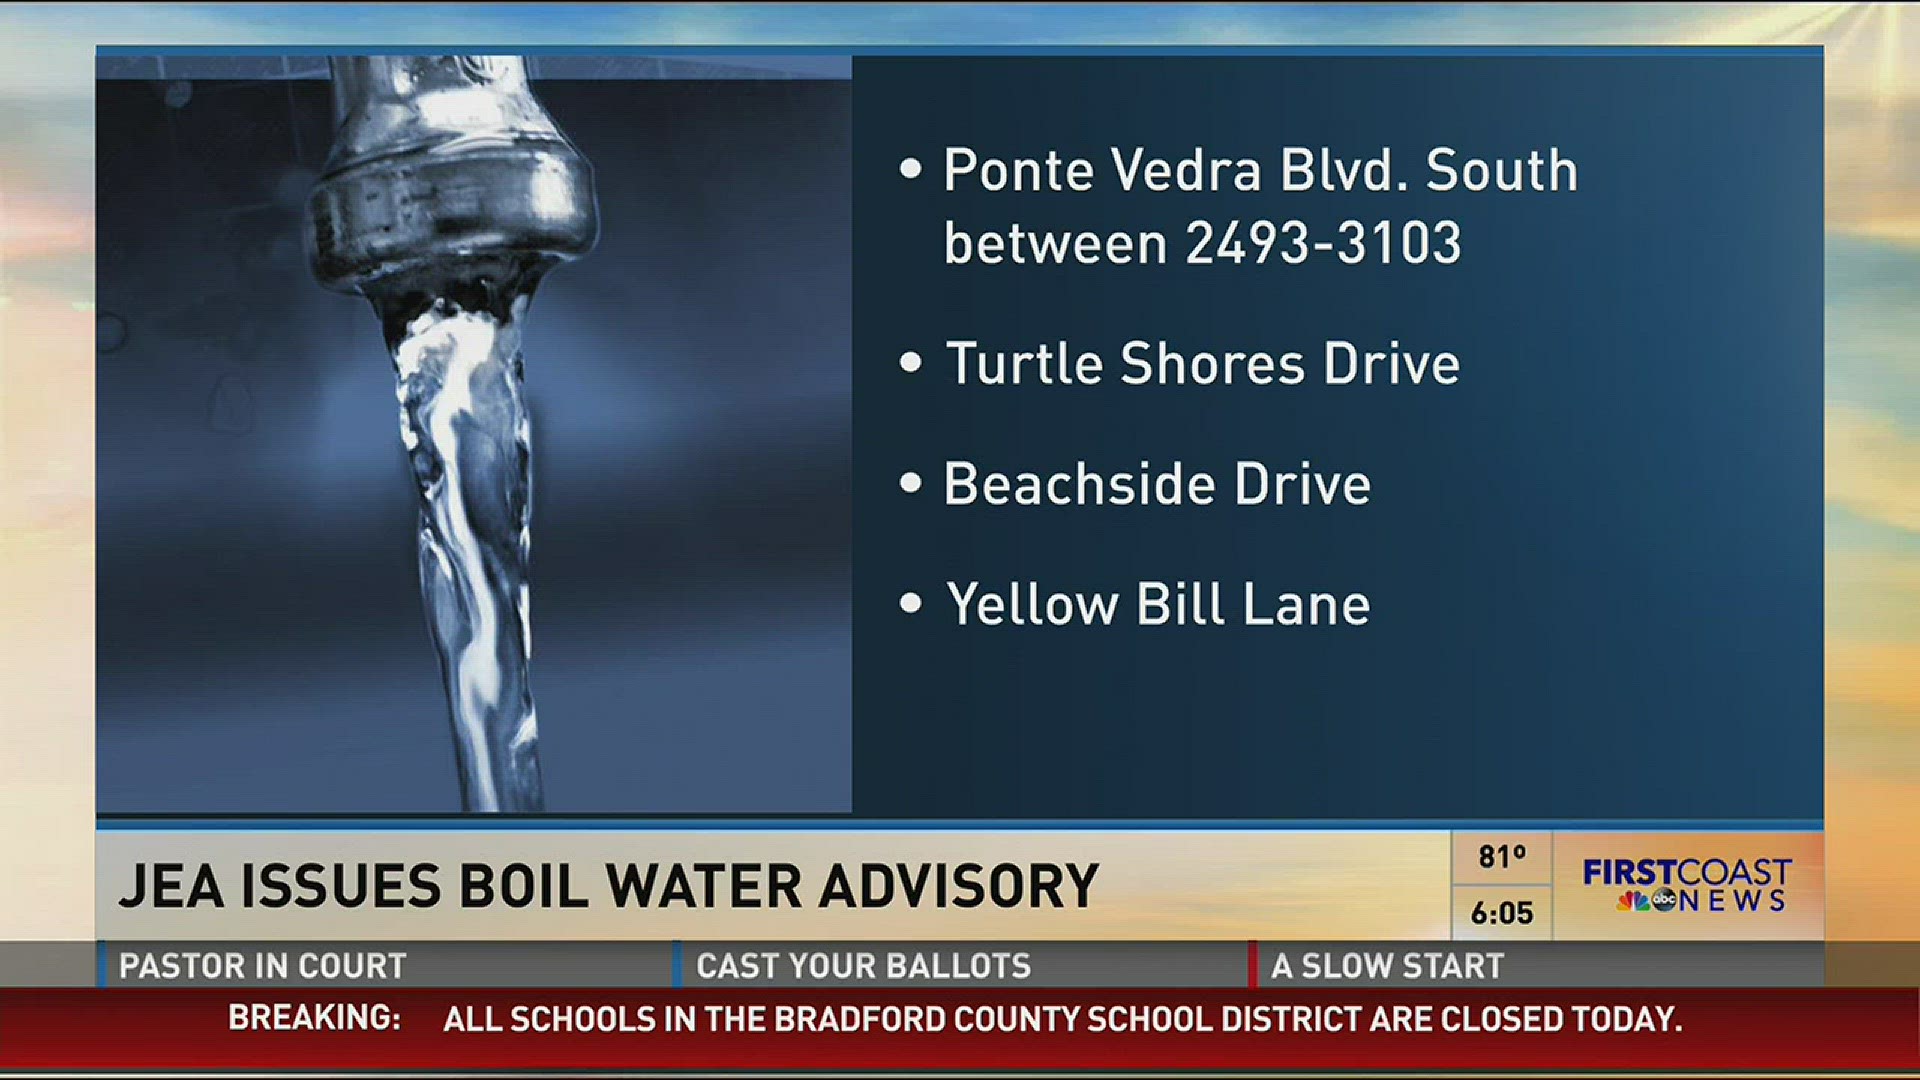 JEA has issued a boil water advisory for parts of South Ponte Vedra Beach